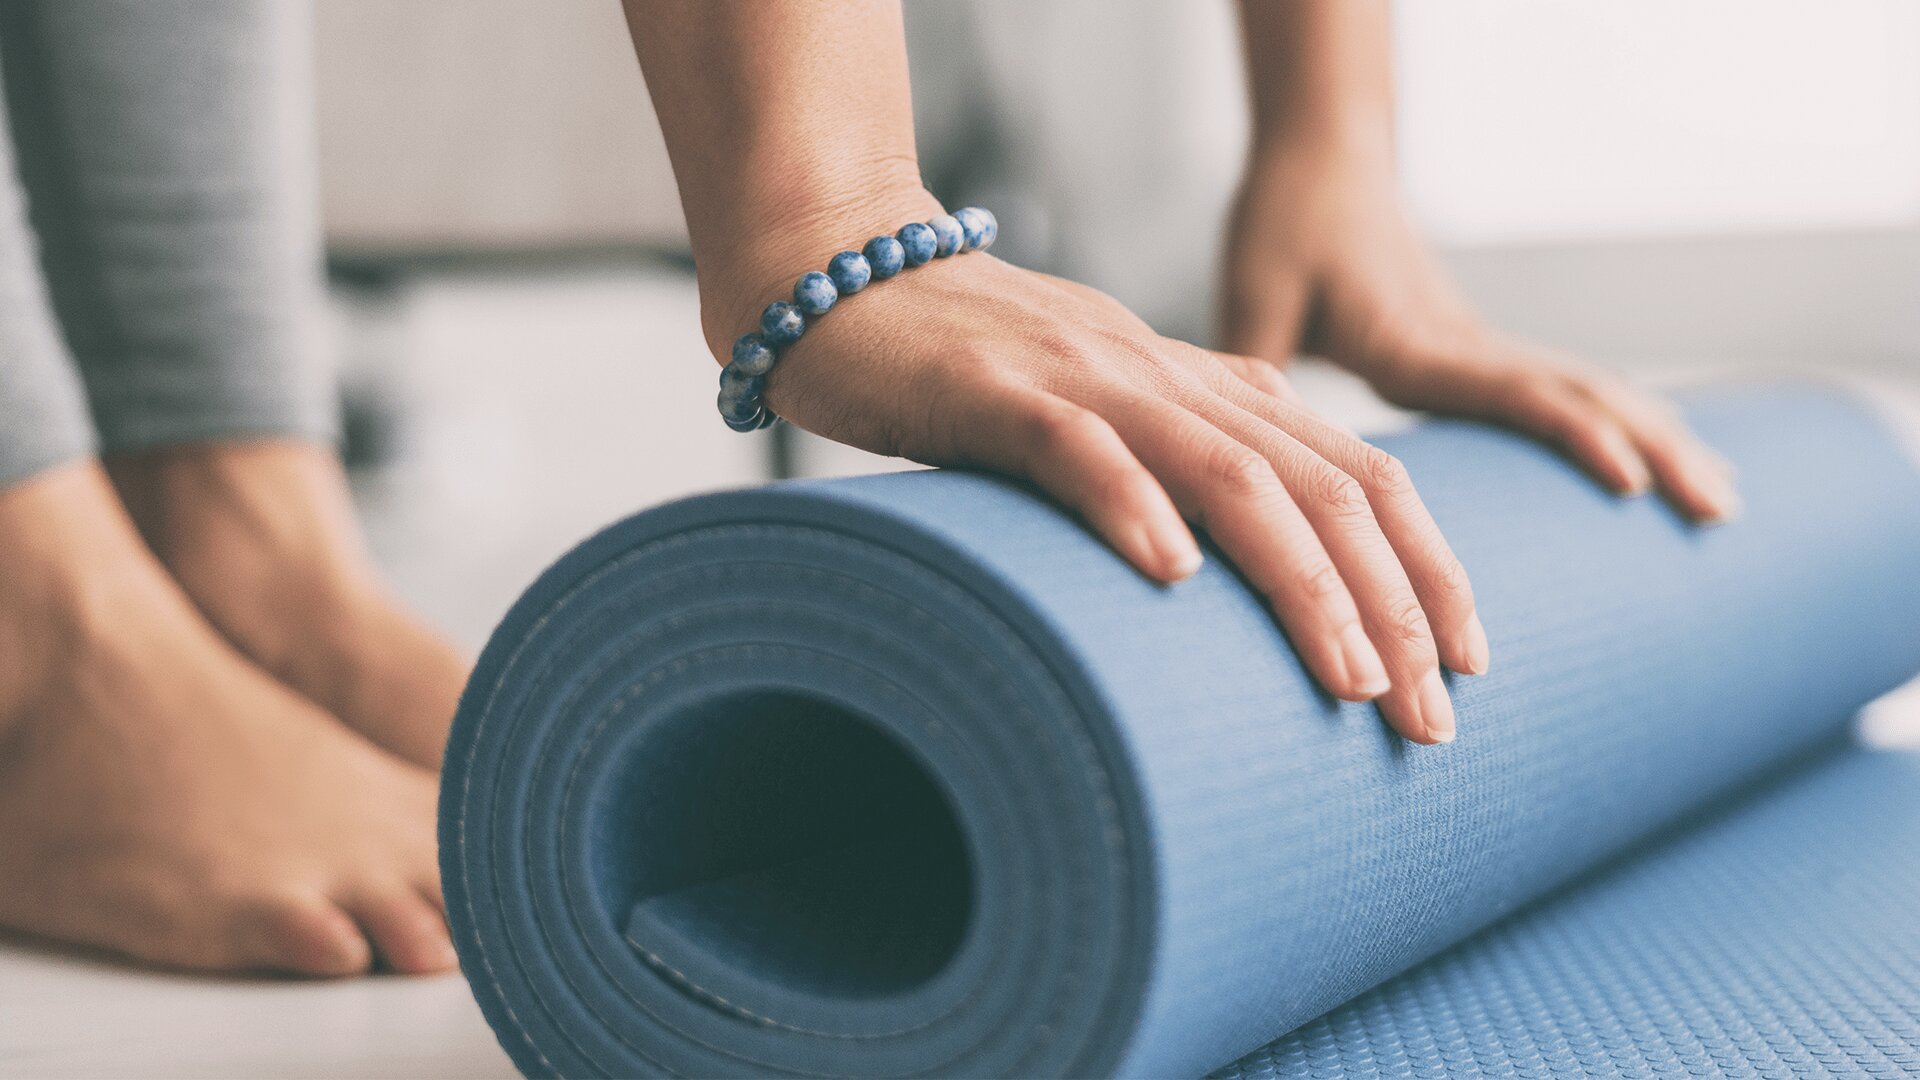 A lady rolls up a yoga mat, exercise programs for seniors